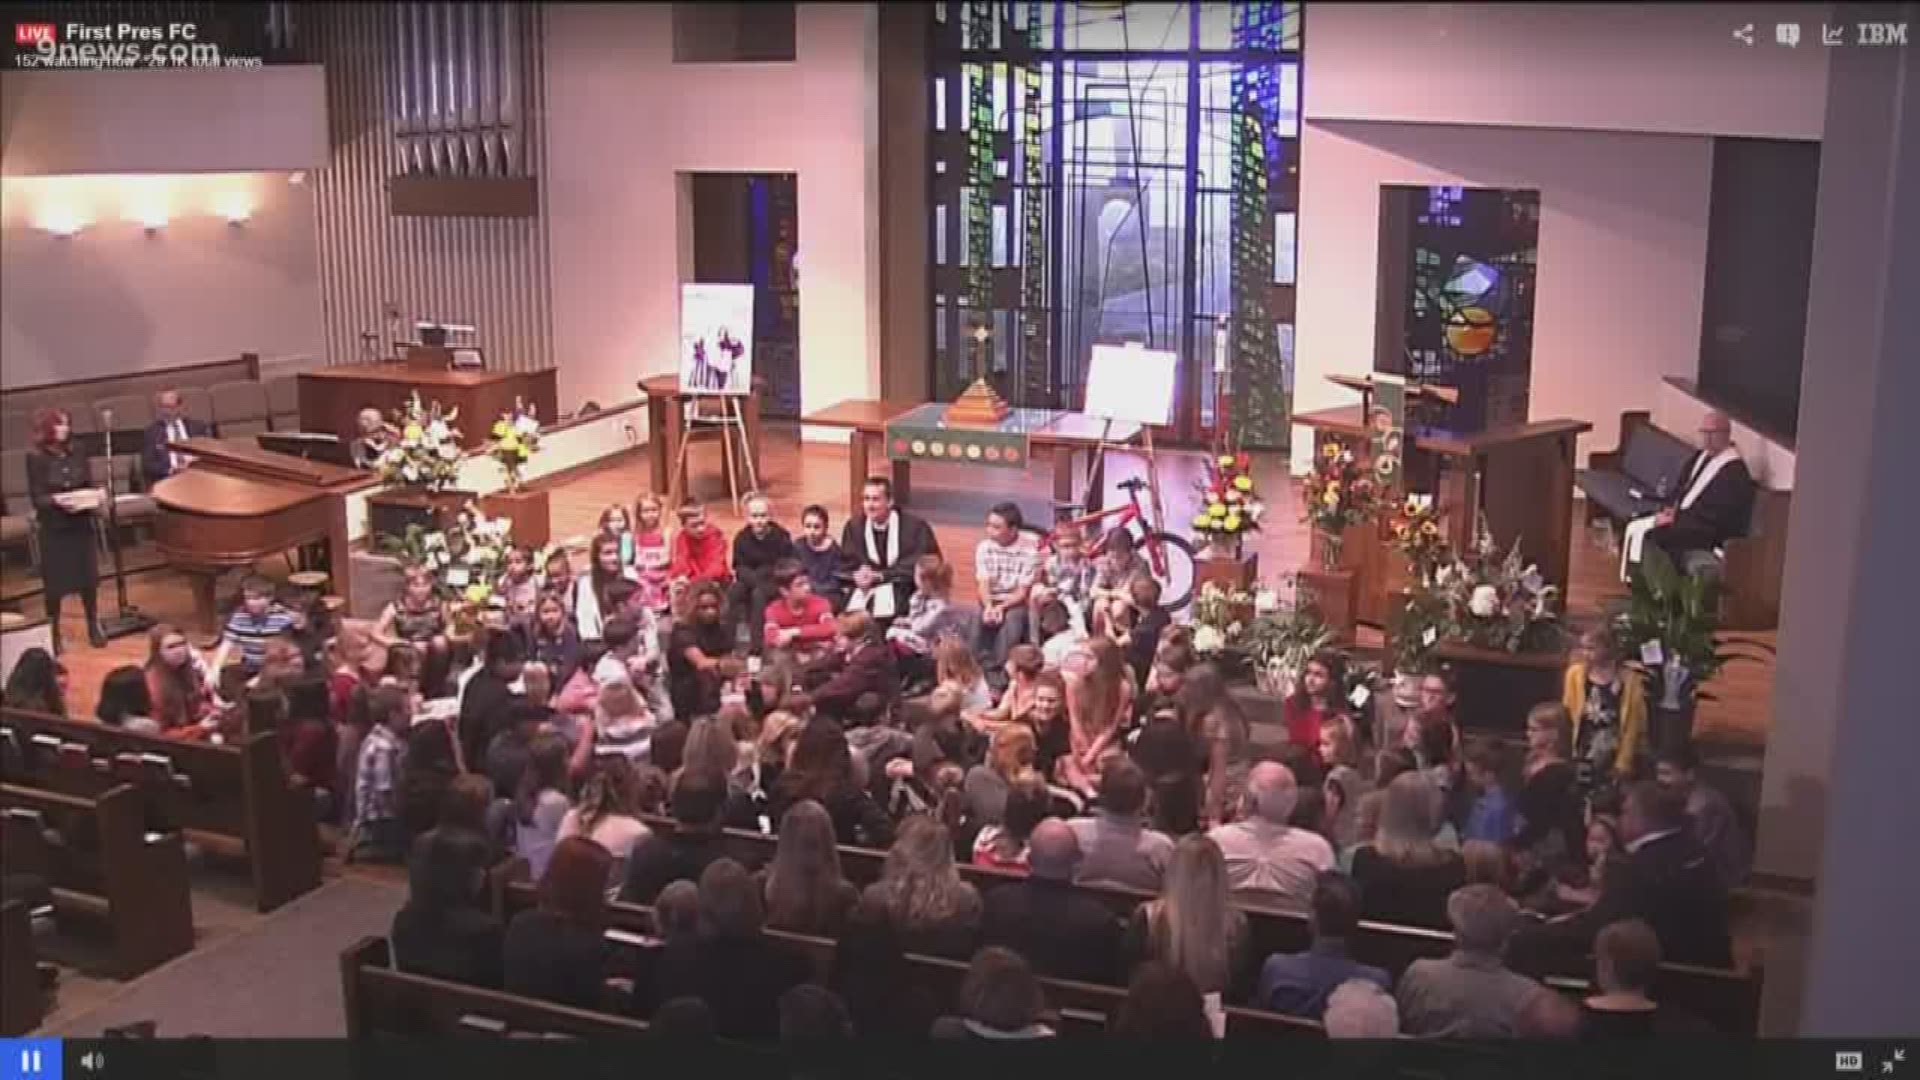 The First Presbyterian Church in Fort Collins hosted a Celebration of Life for Vale Wolkow.